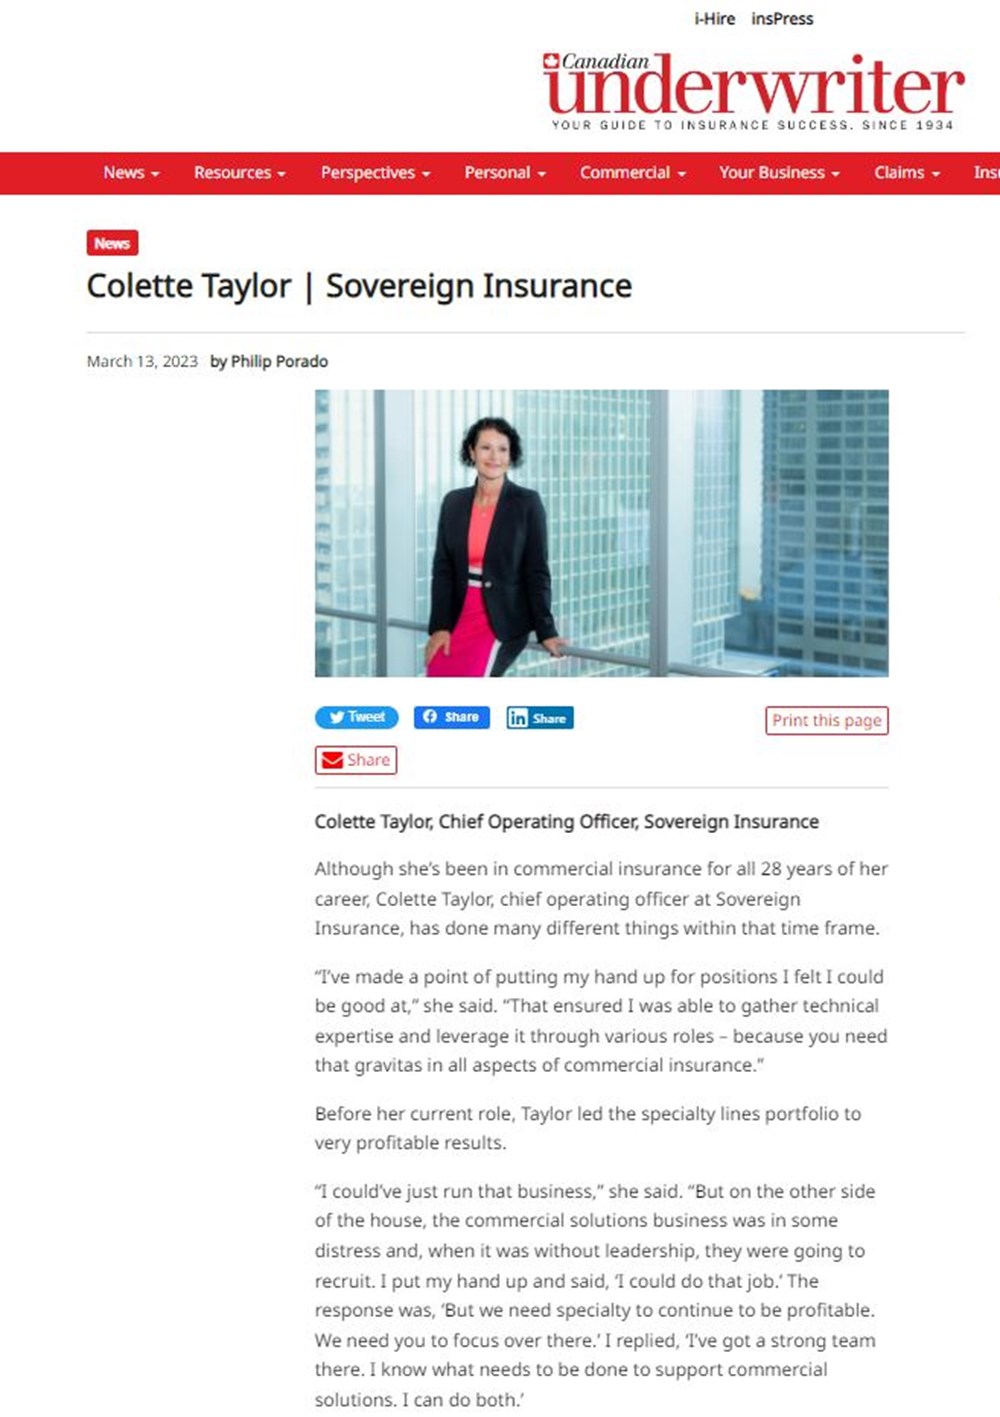 A screenshot of a magazine article from Canadian Underwriter. It features a photo of Colette Taylor, a woman with curly hair, a pink dress, and a black jacket.